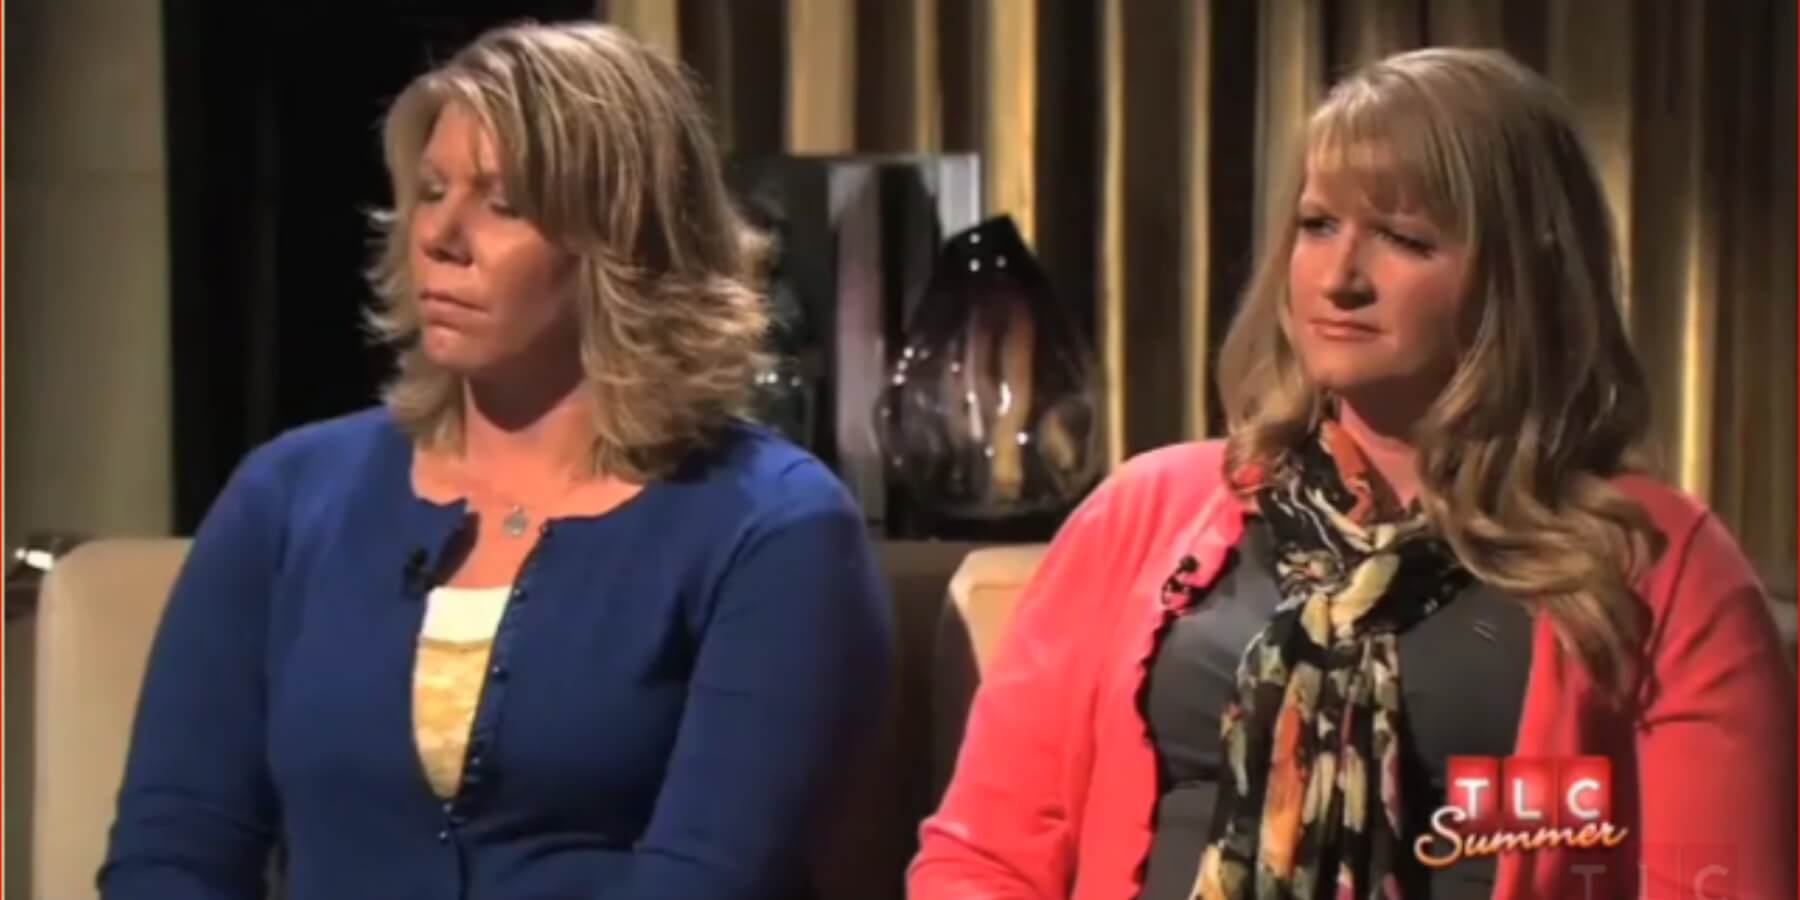 Meri Brown and Christine Brown are seated during the Natalie Morales led-'Sister Wives' tell-all in season 3.